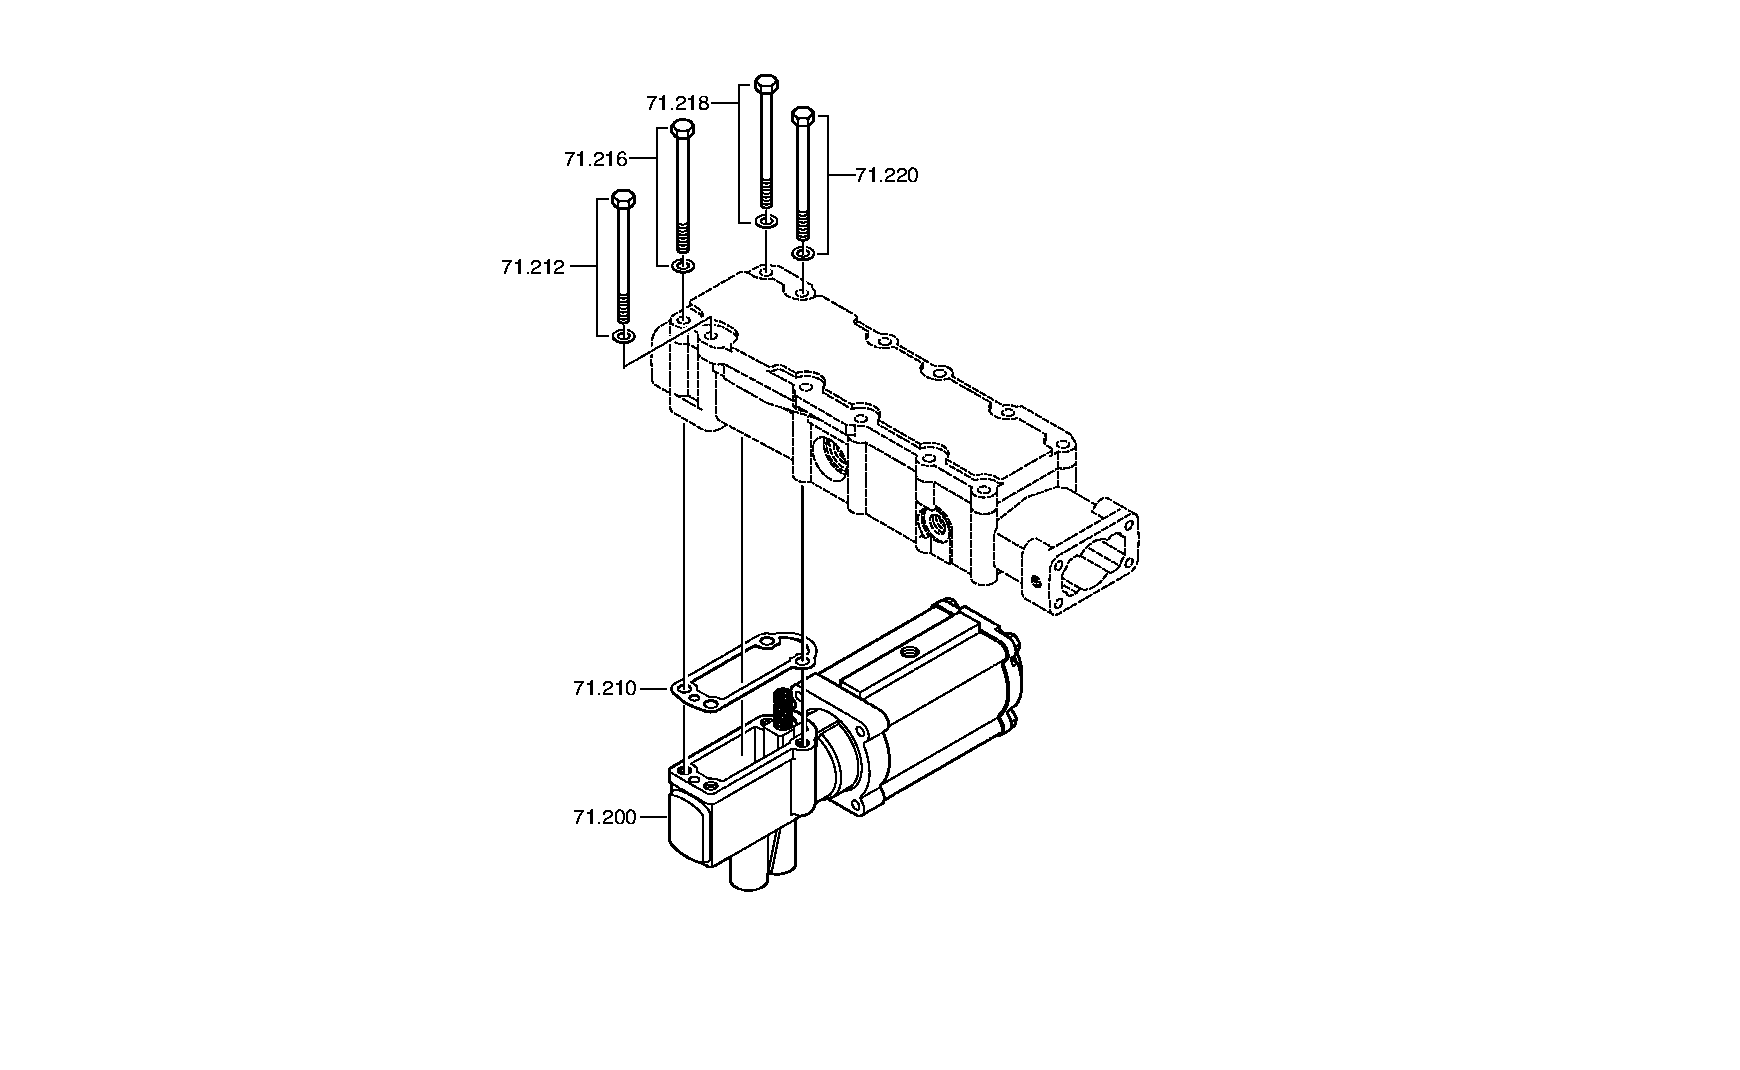 drawing for Astra Veicoli Industriali 123262 - GASKET (figure 3)